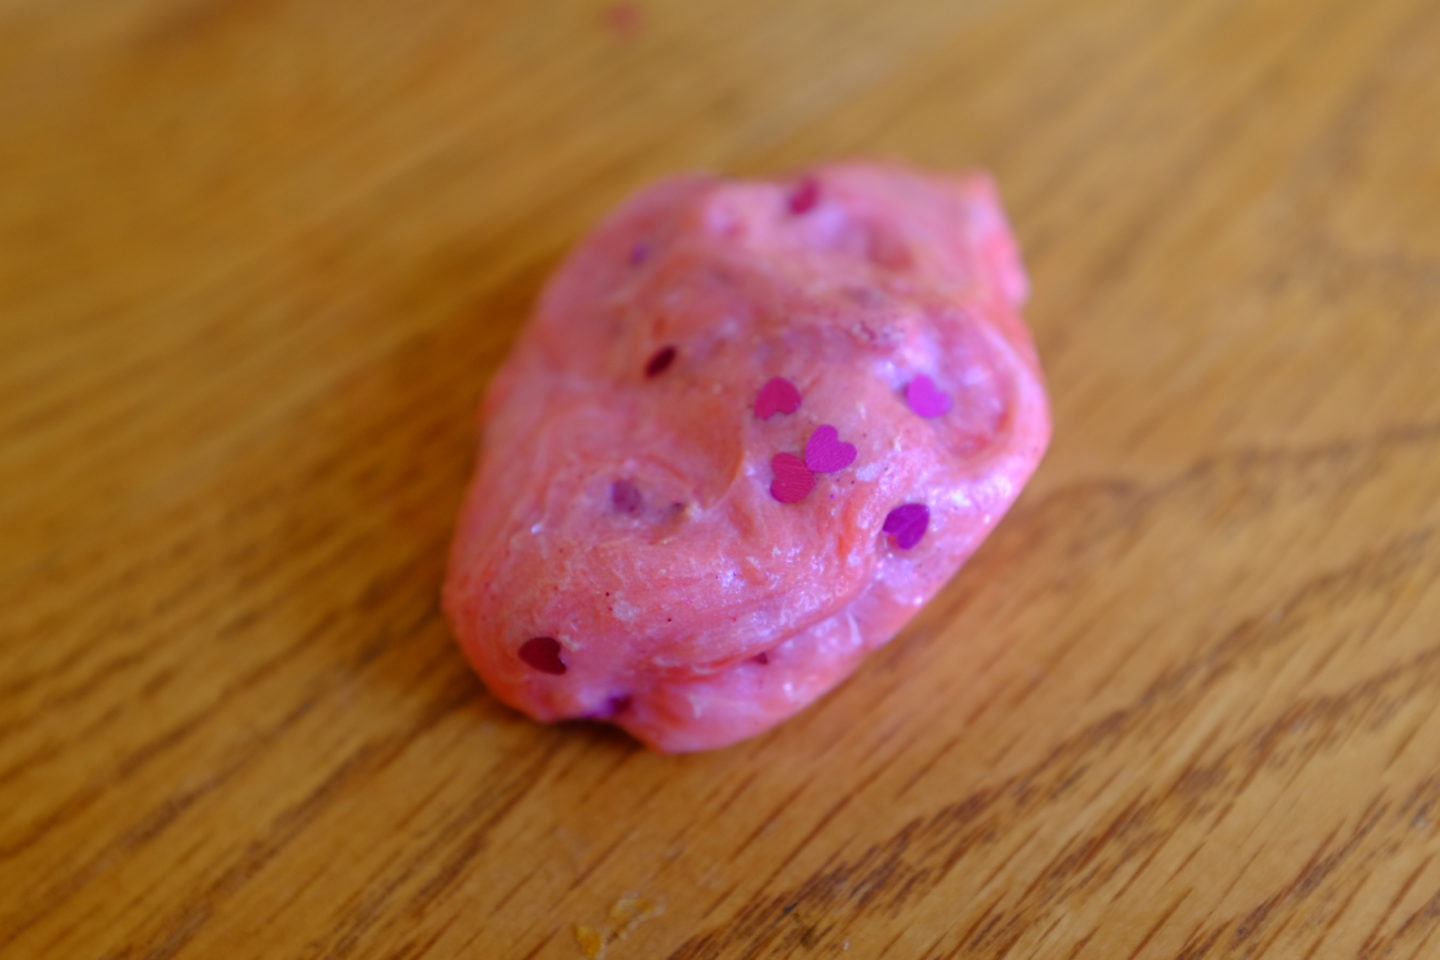 decorated slime from Poopsie Slime Surprise Sparkly Critters